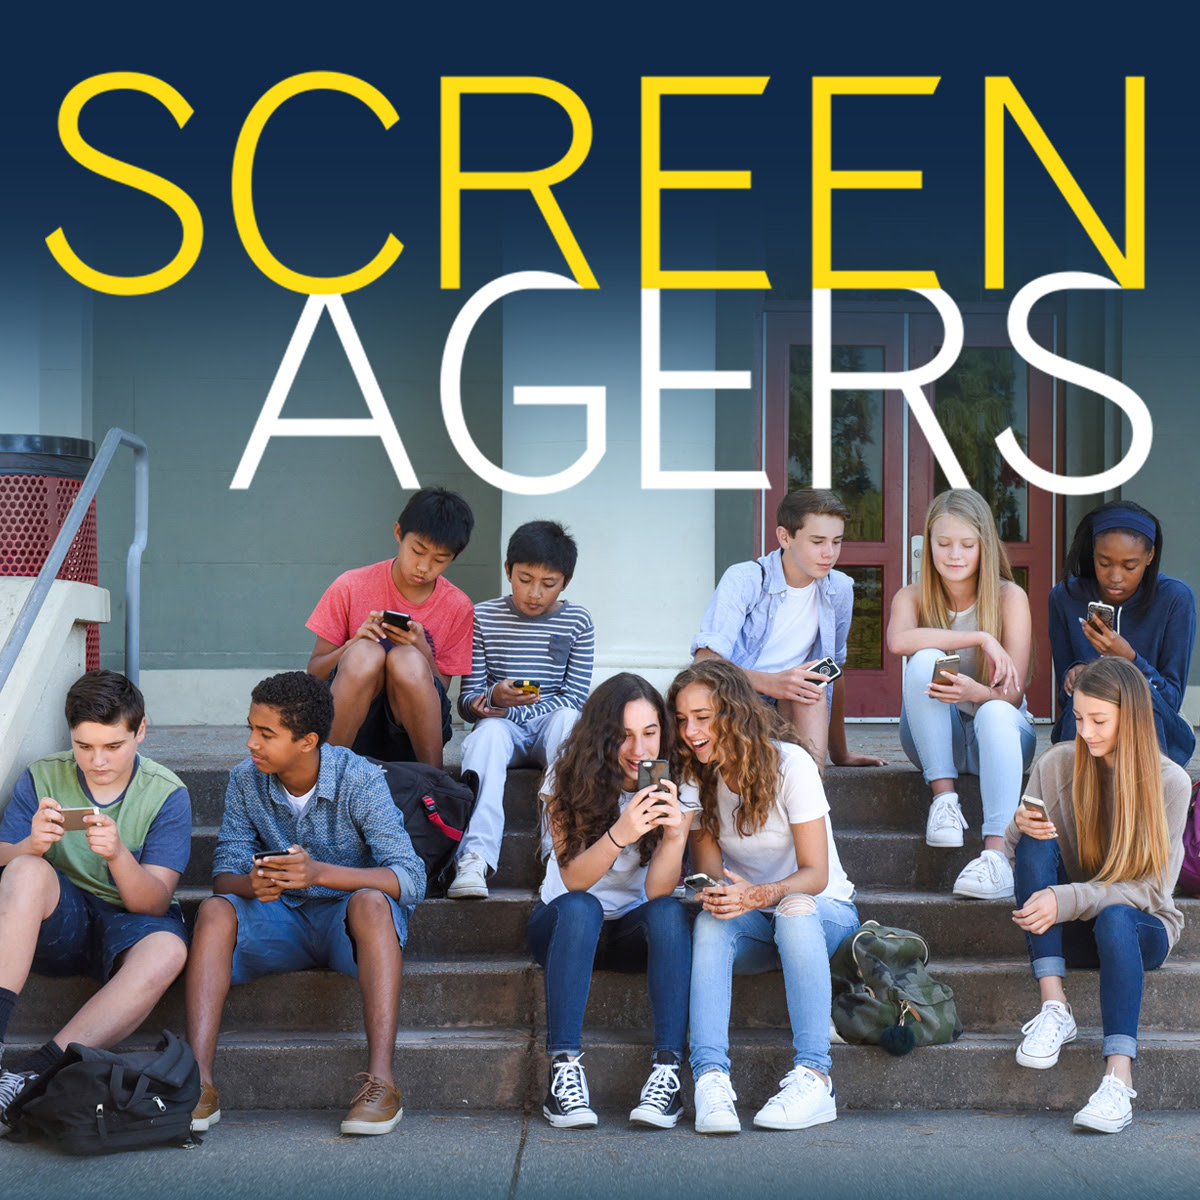 Screenagers Film Presented By Academy of Health and Medicine- Arroyo High School (RESCHEDULED TBD)